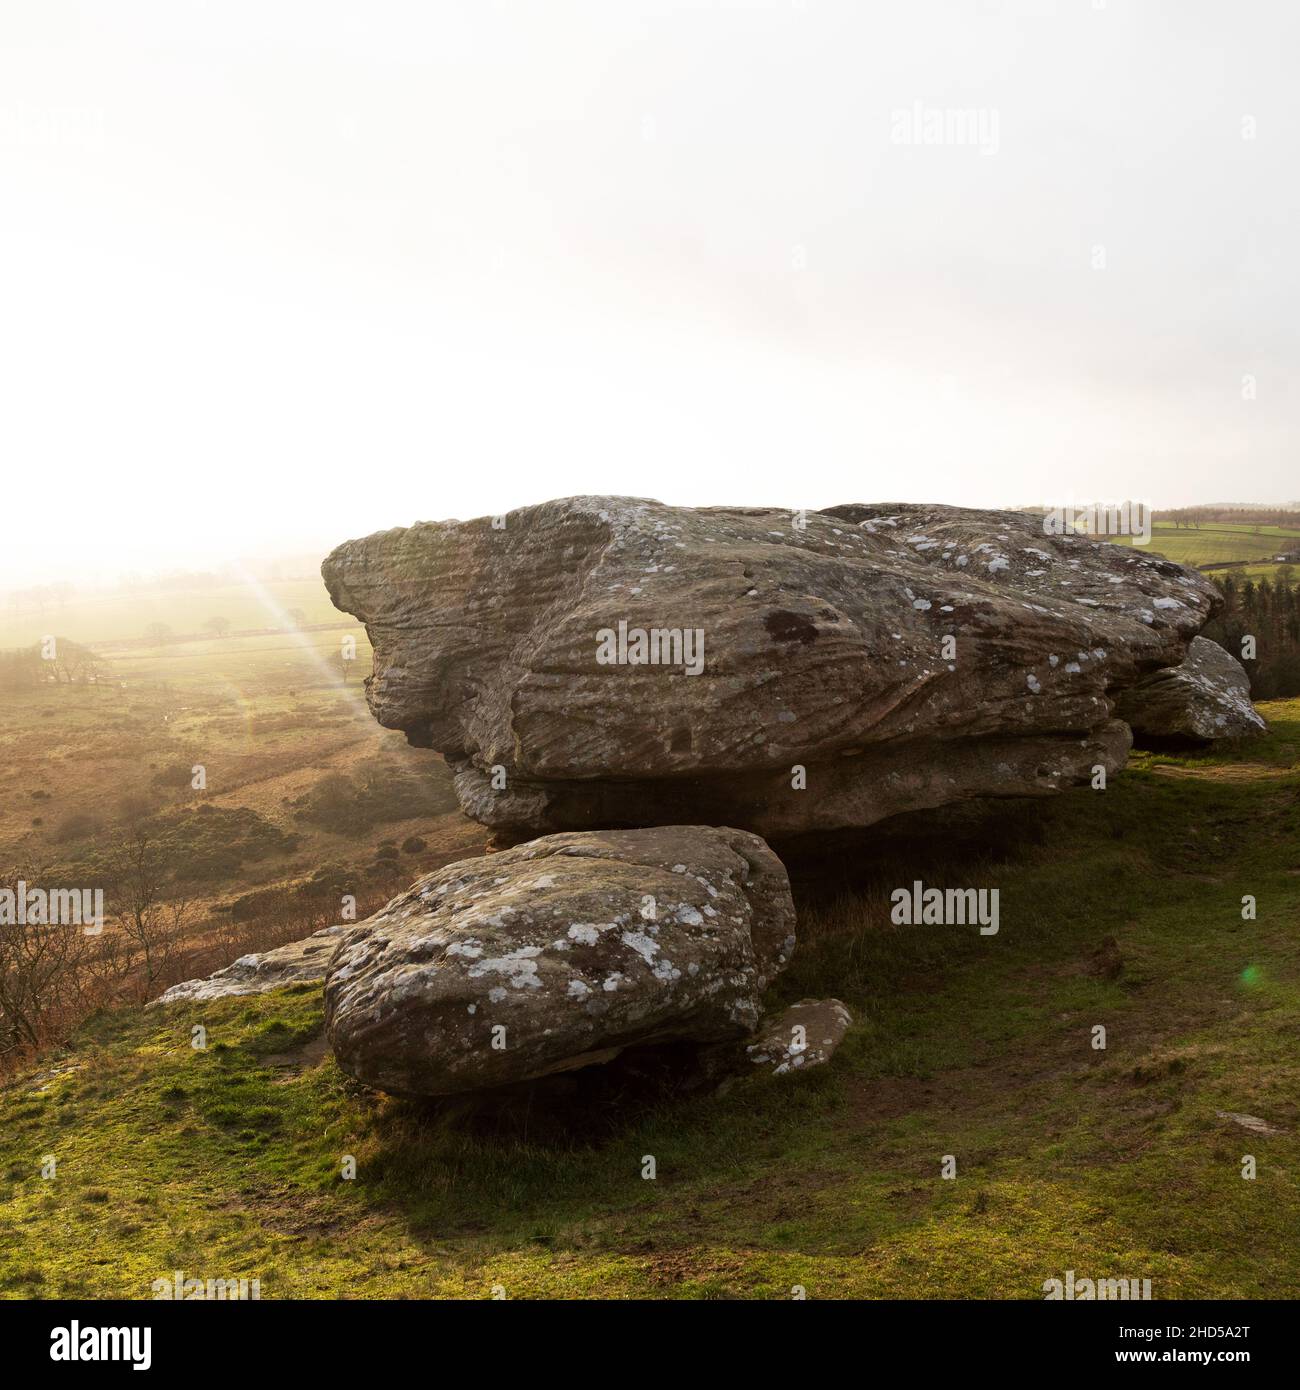 Rock overlooking countryside at Shaftoe Crags in Northumberland, England. The low winter sun gives the sky a golden hue. Stock Photo